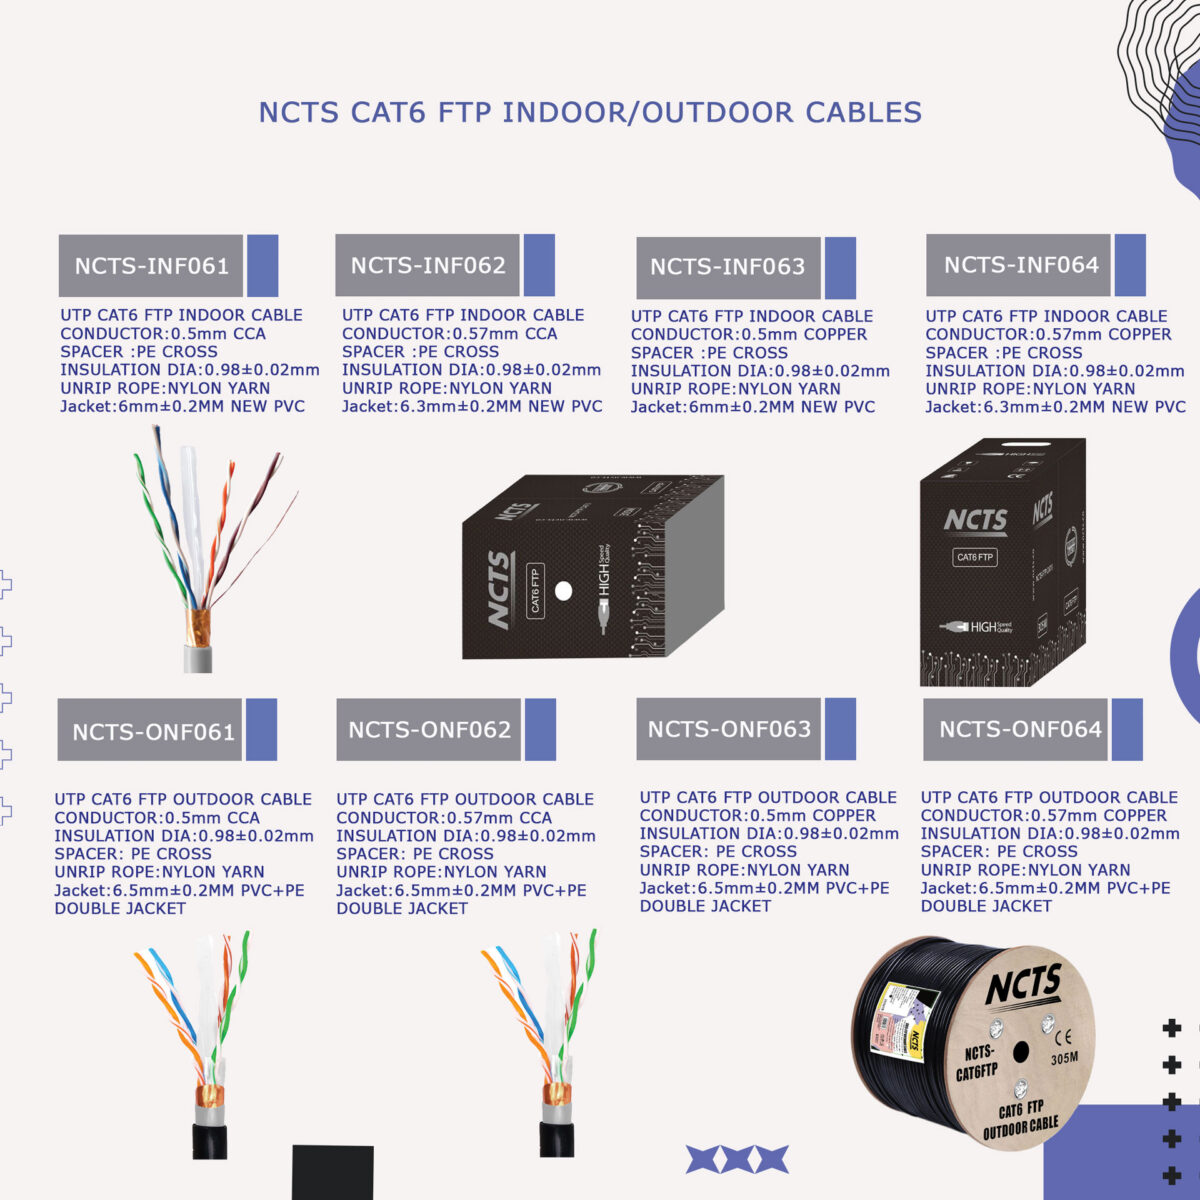 NCTS CAT6 FTP